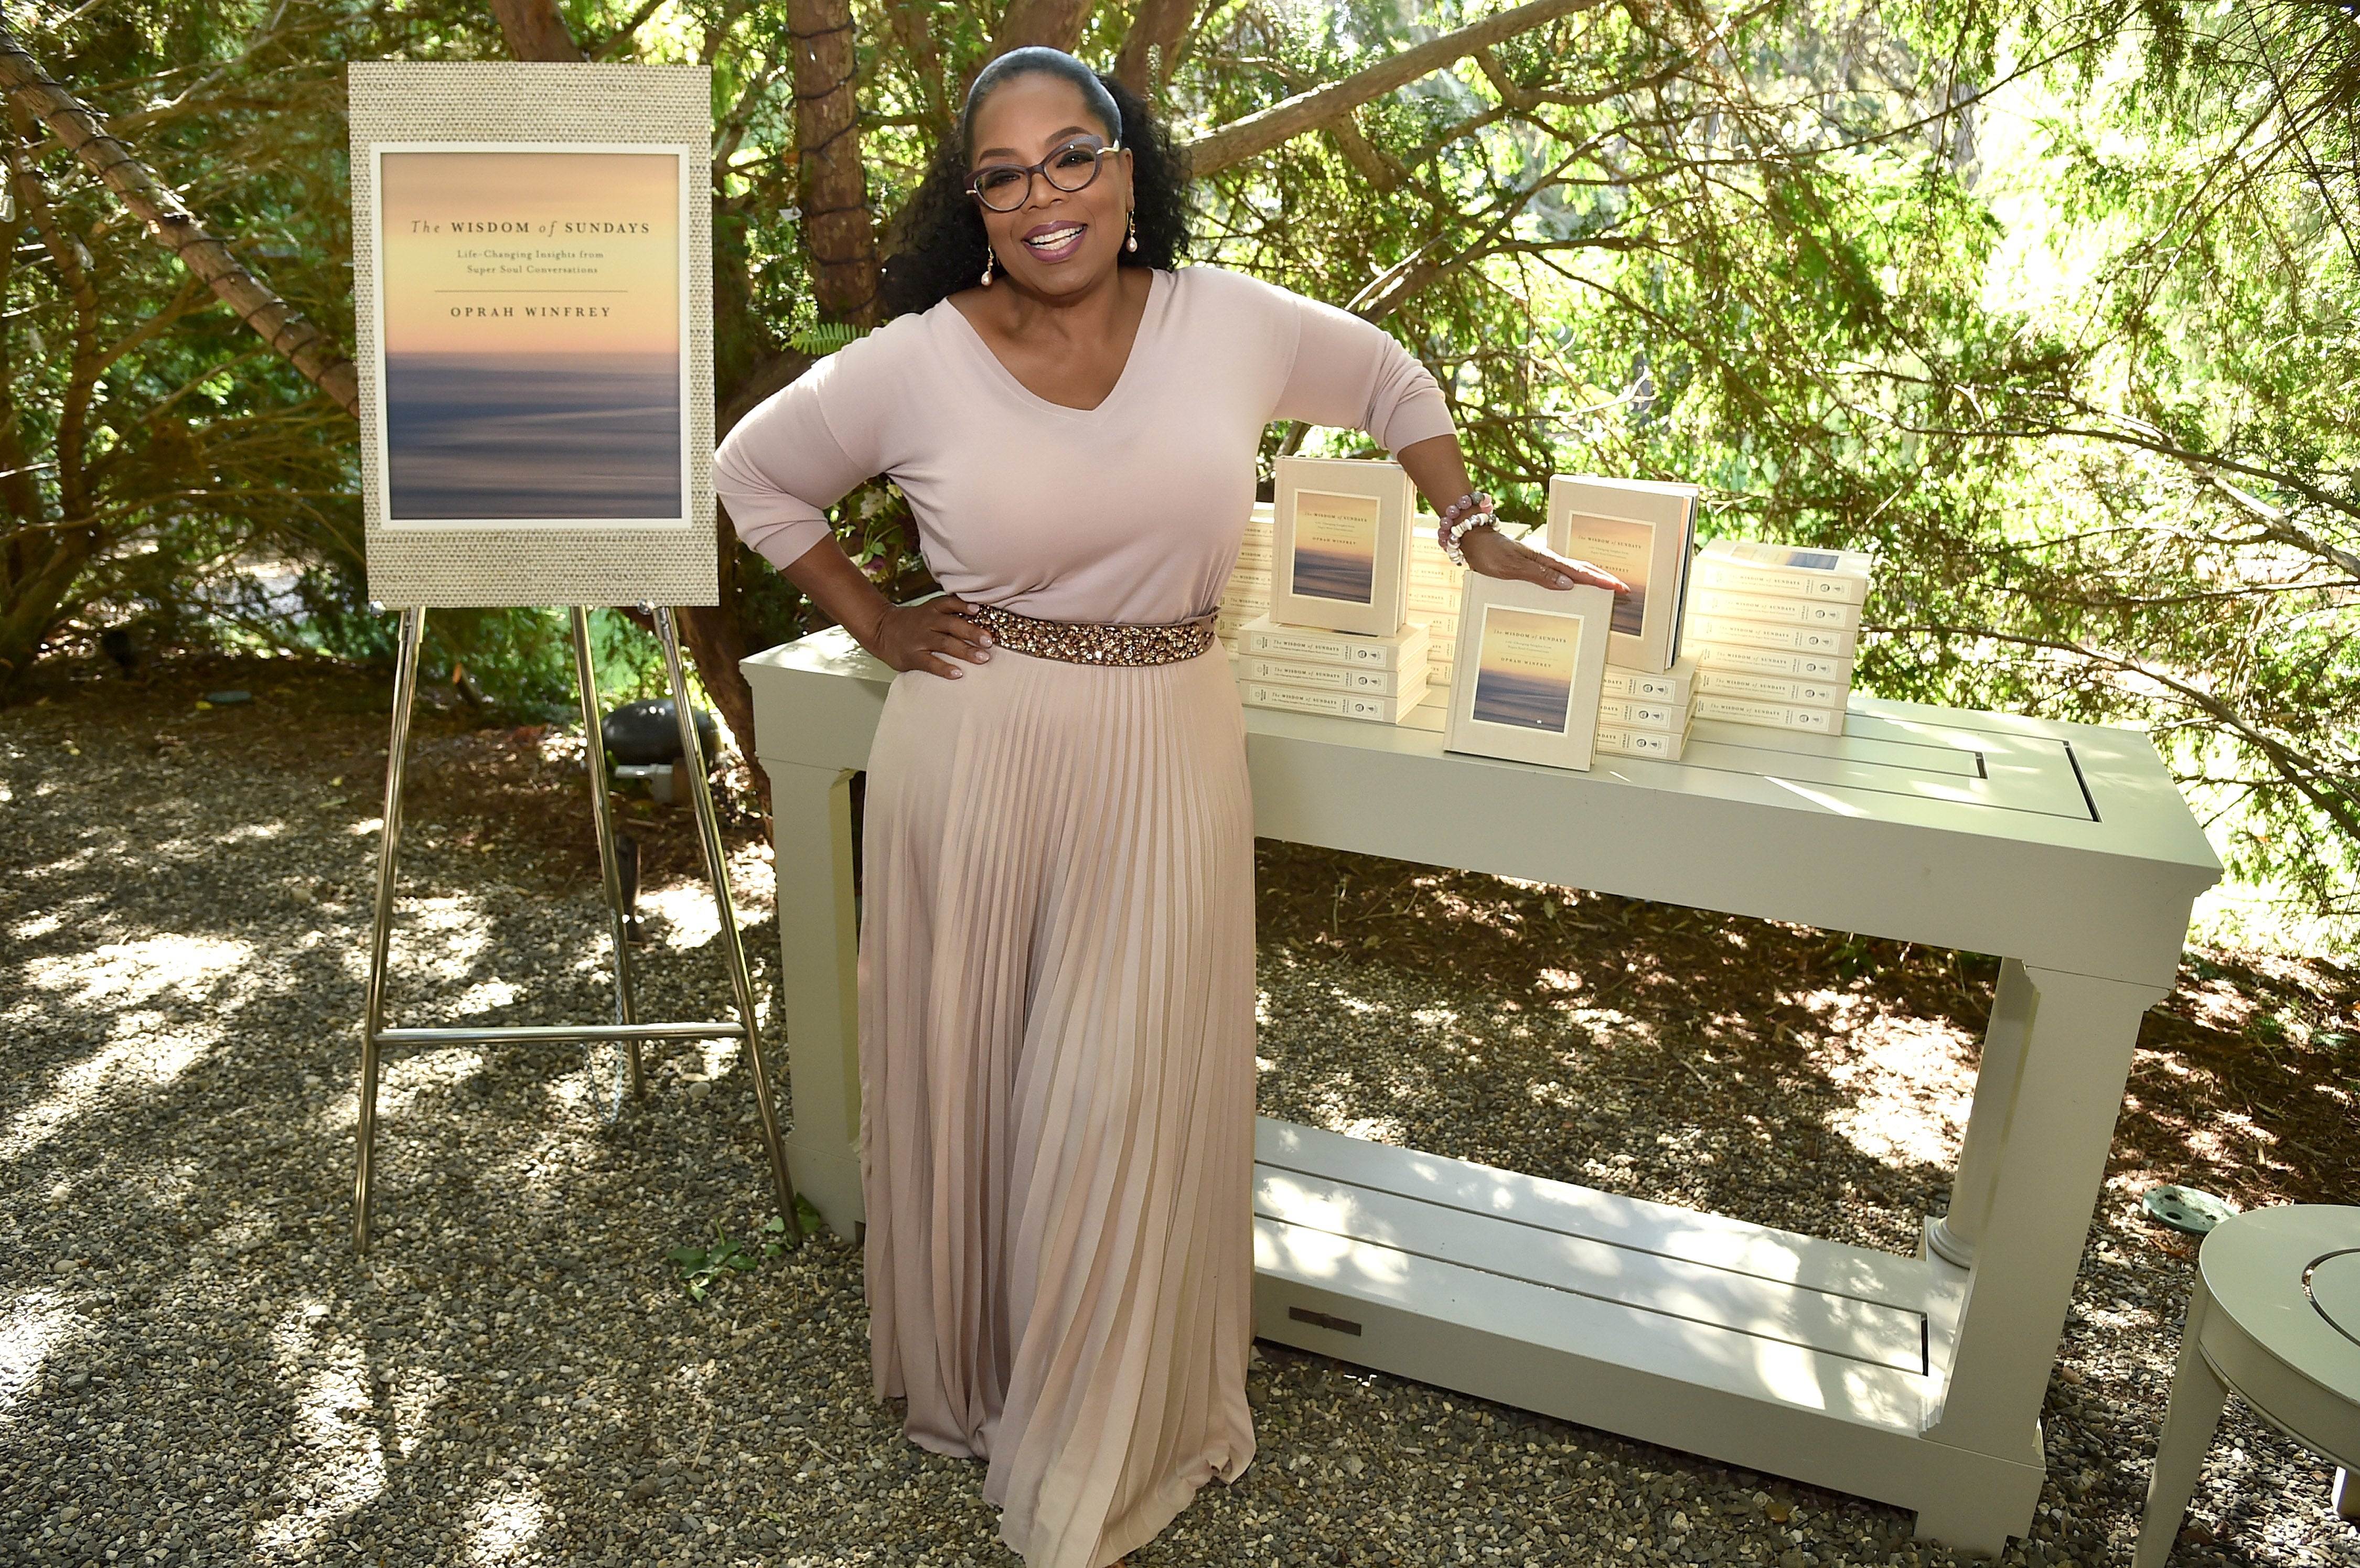 Super Soul - Did you miss Shonda Rhimes on SuperSoul Sunday? Catch the full  episode here